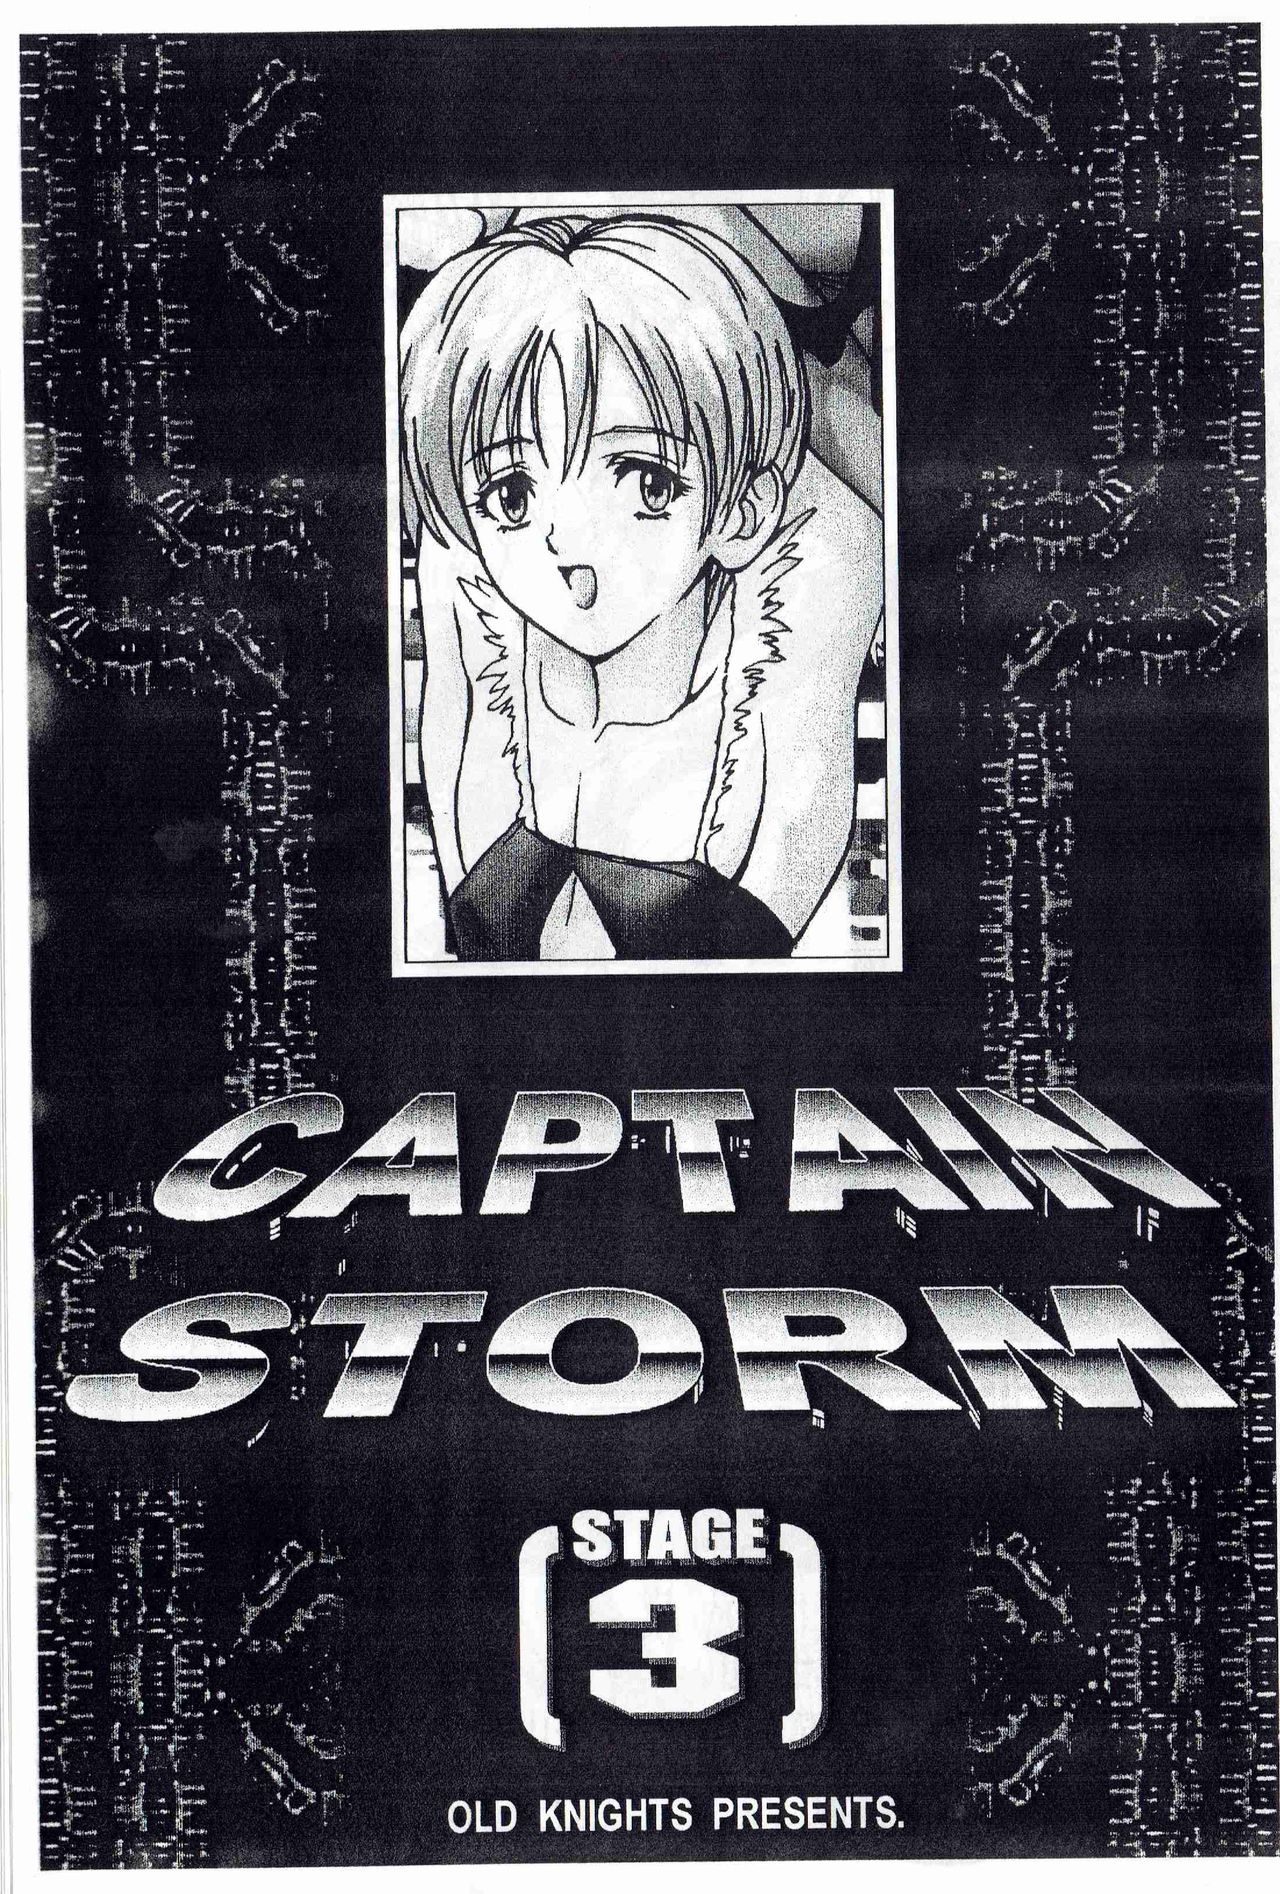 [Kyuukisidan(Takesin)] CAPTAIN STORM STAGE 3 page 2 full